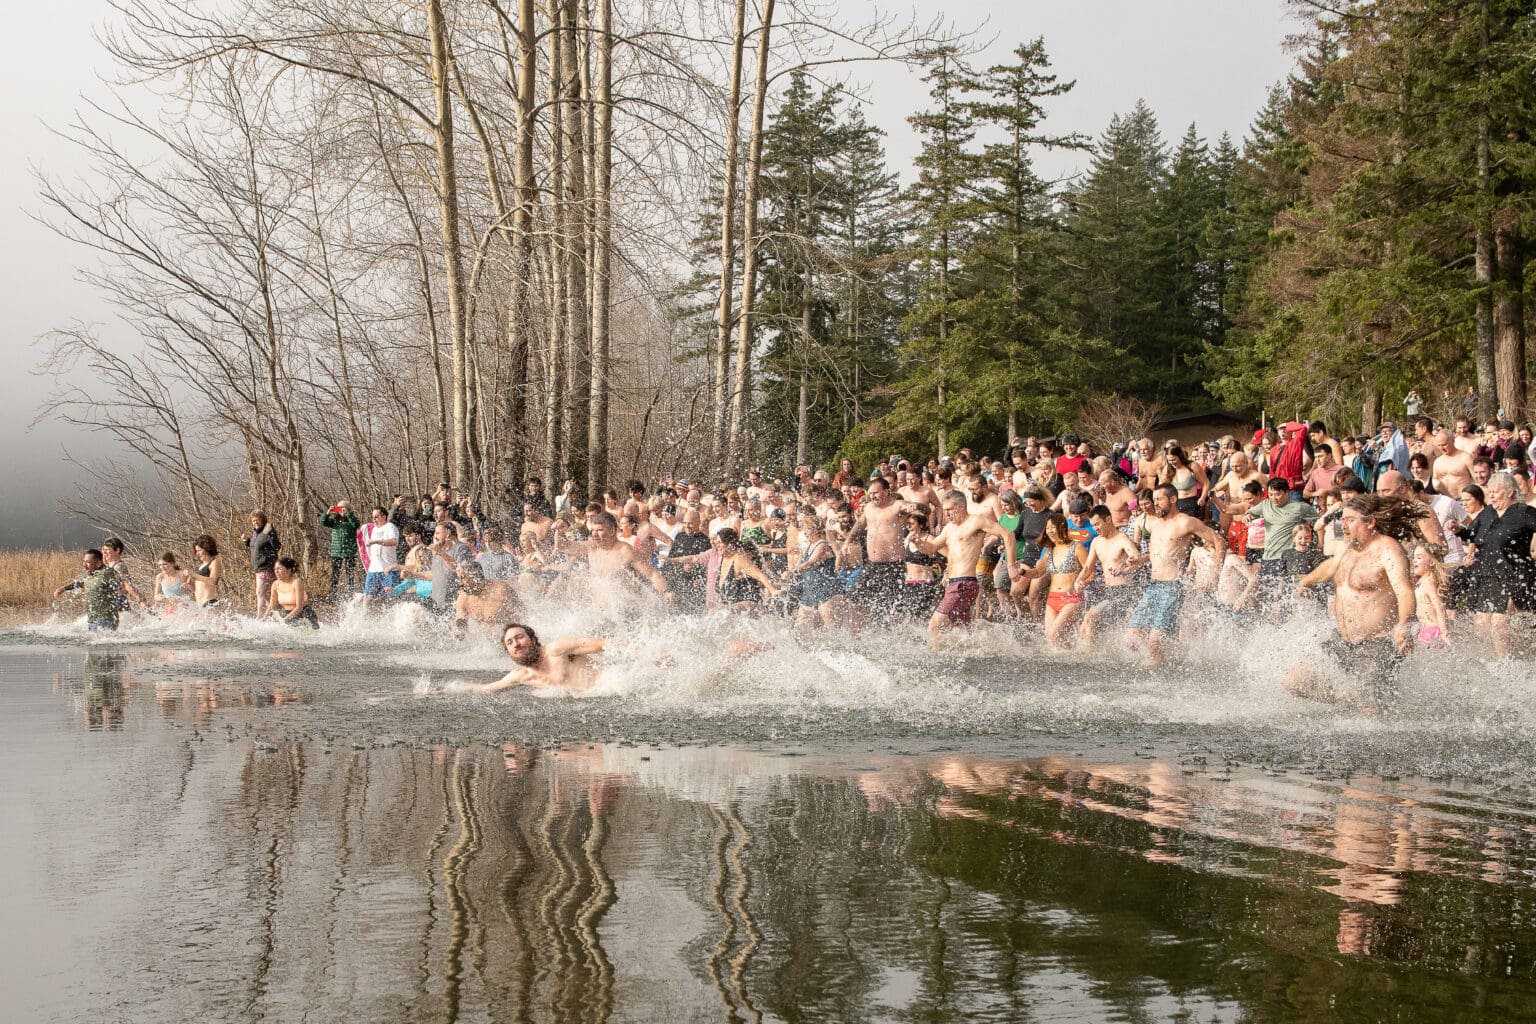 Crowds of Padden Polar Dip participants dash into the cold water as many wait their turn.